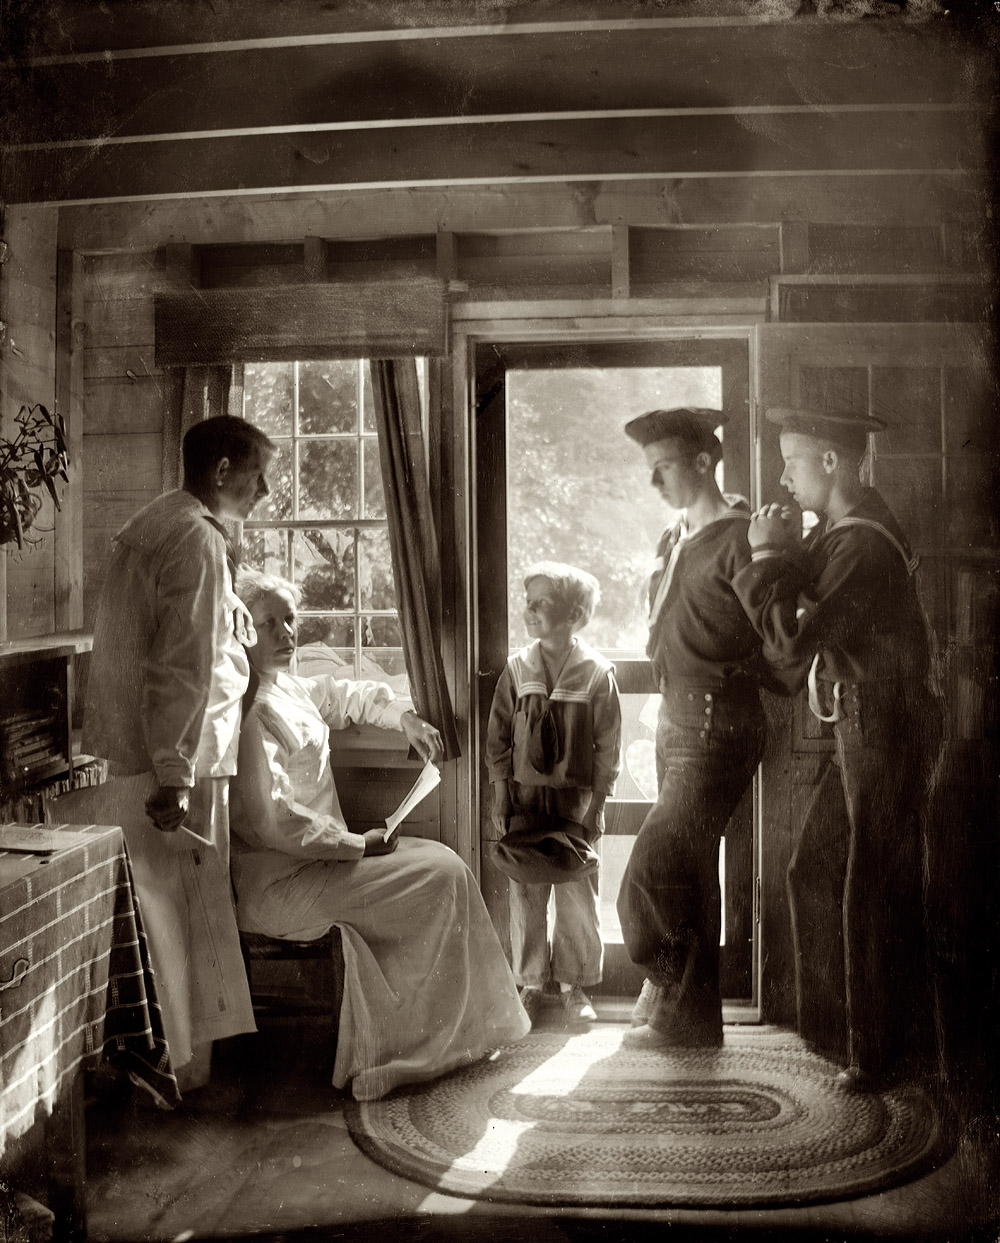 1913. "The Clarence White family in Maine. Mrs. Clarence White, seated by window in light, her husband and three sons in sailor outfits standing around her." 8x10 dry plate glass negative by Gertrude Käsebier. View full size.